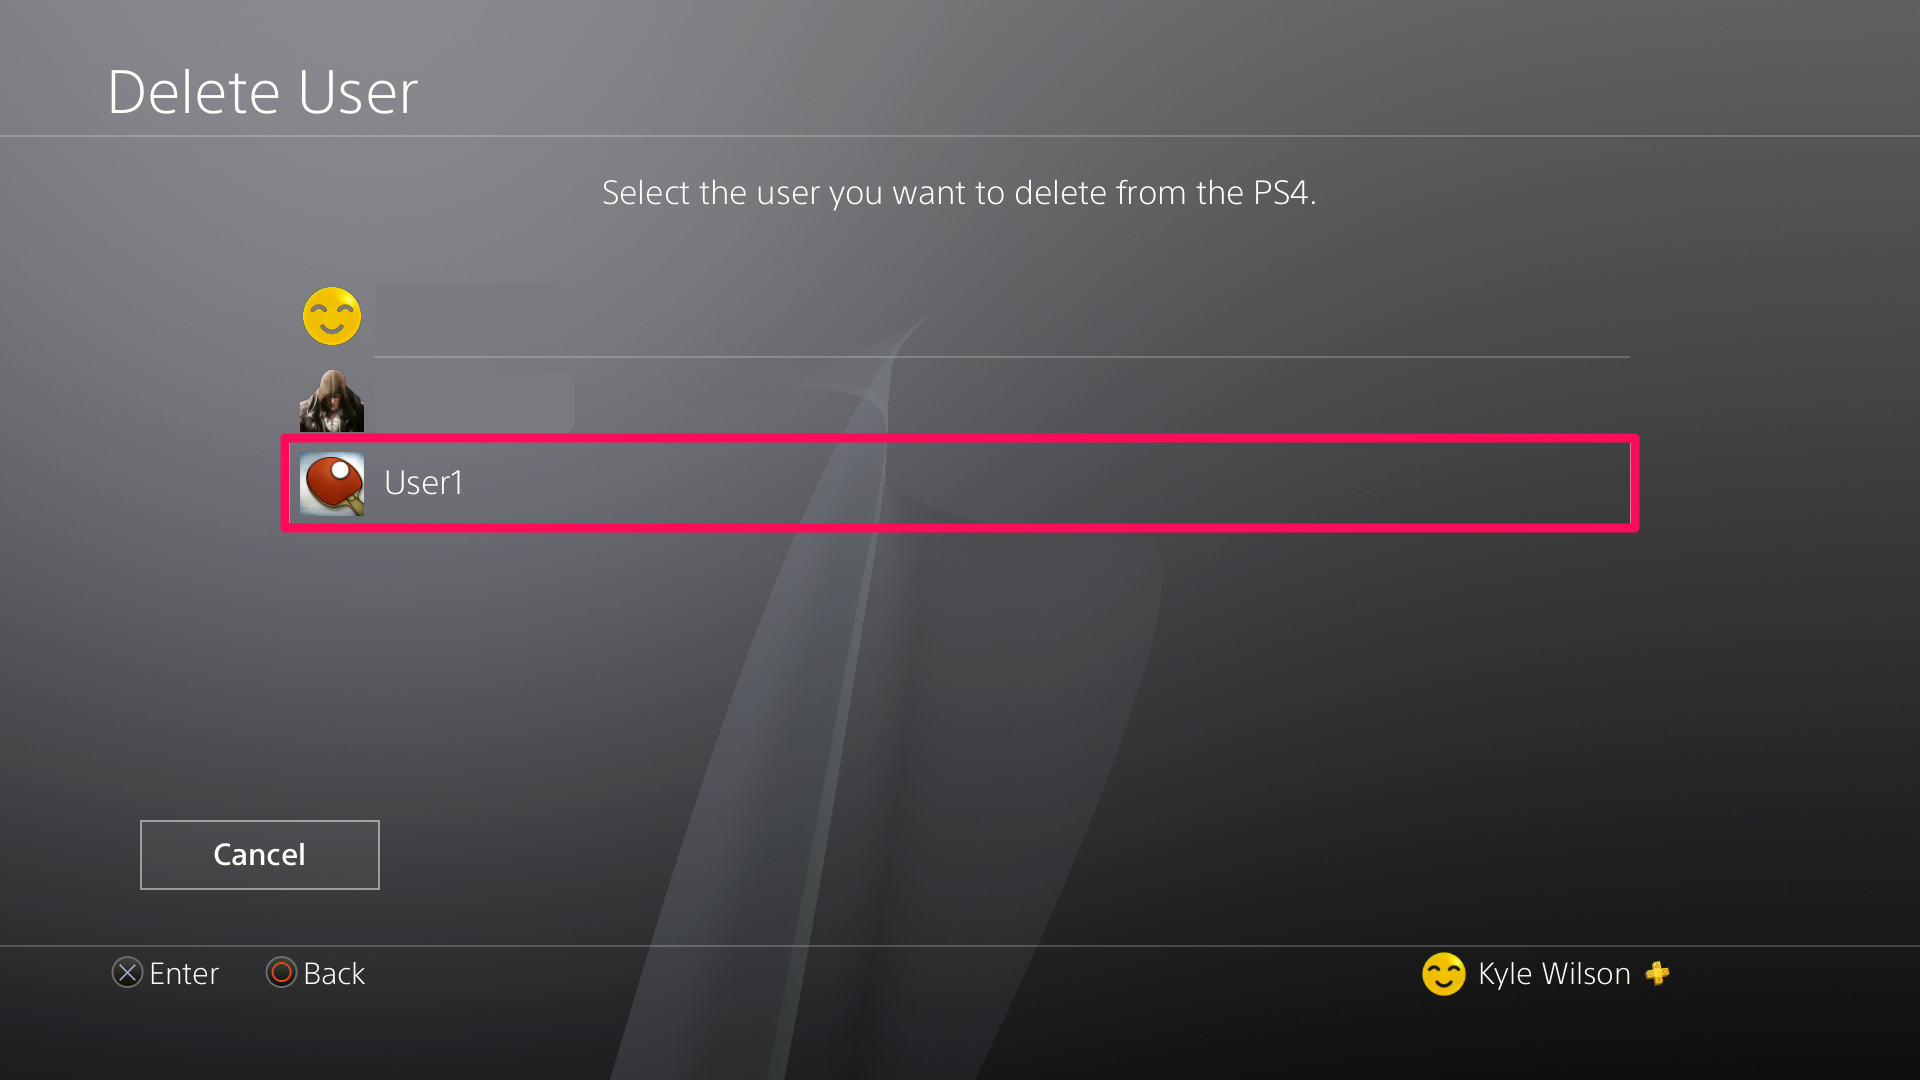 A screenshot of the PS4 Delete User screen with a box around a user named User1.